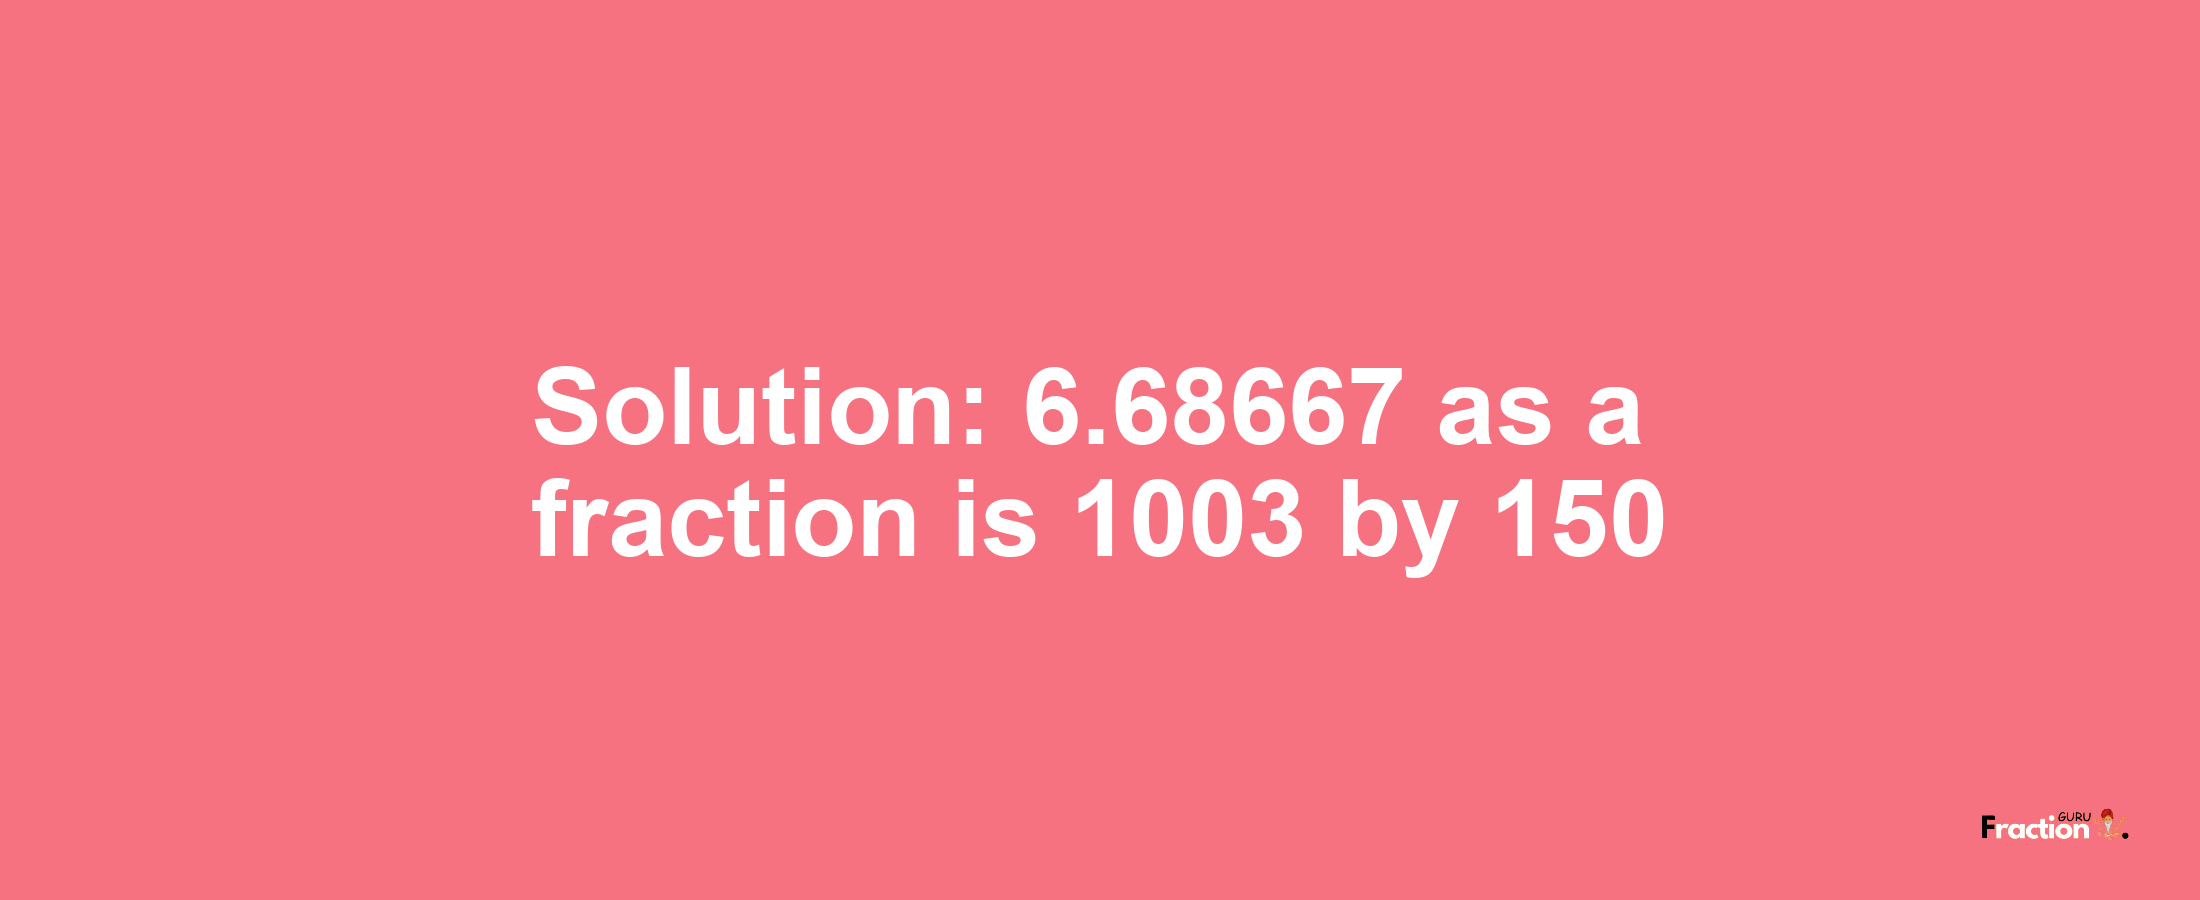 Solution:6.68667 as a fraction is 1003/150